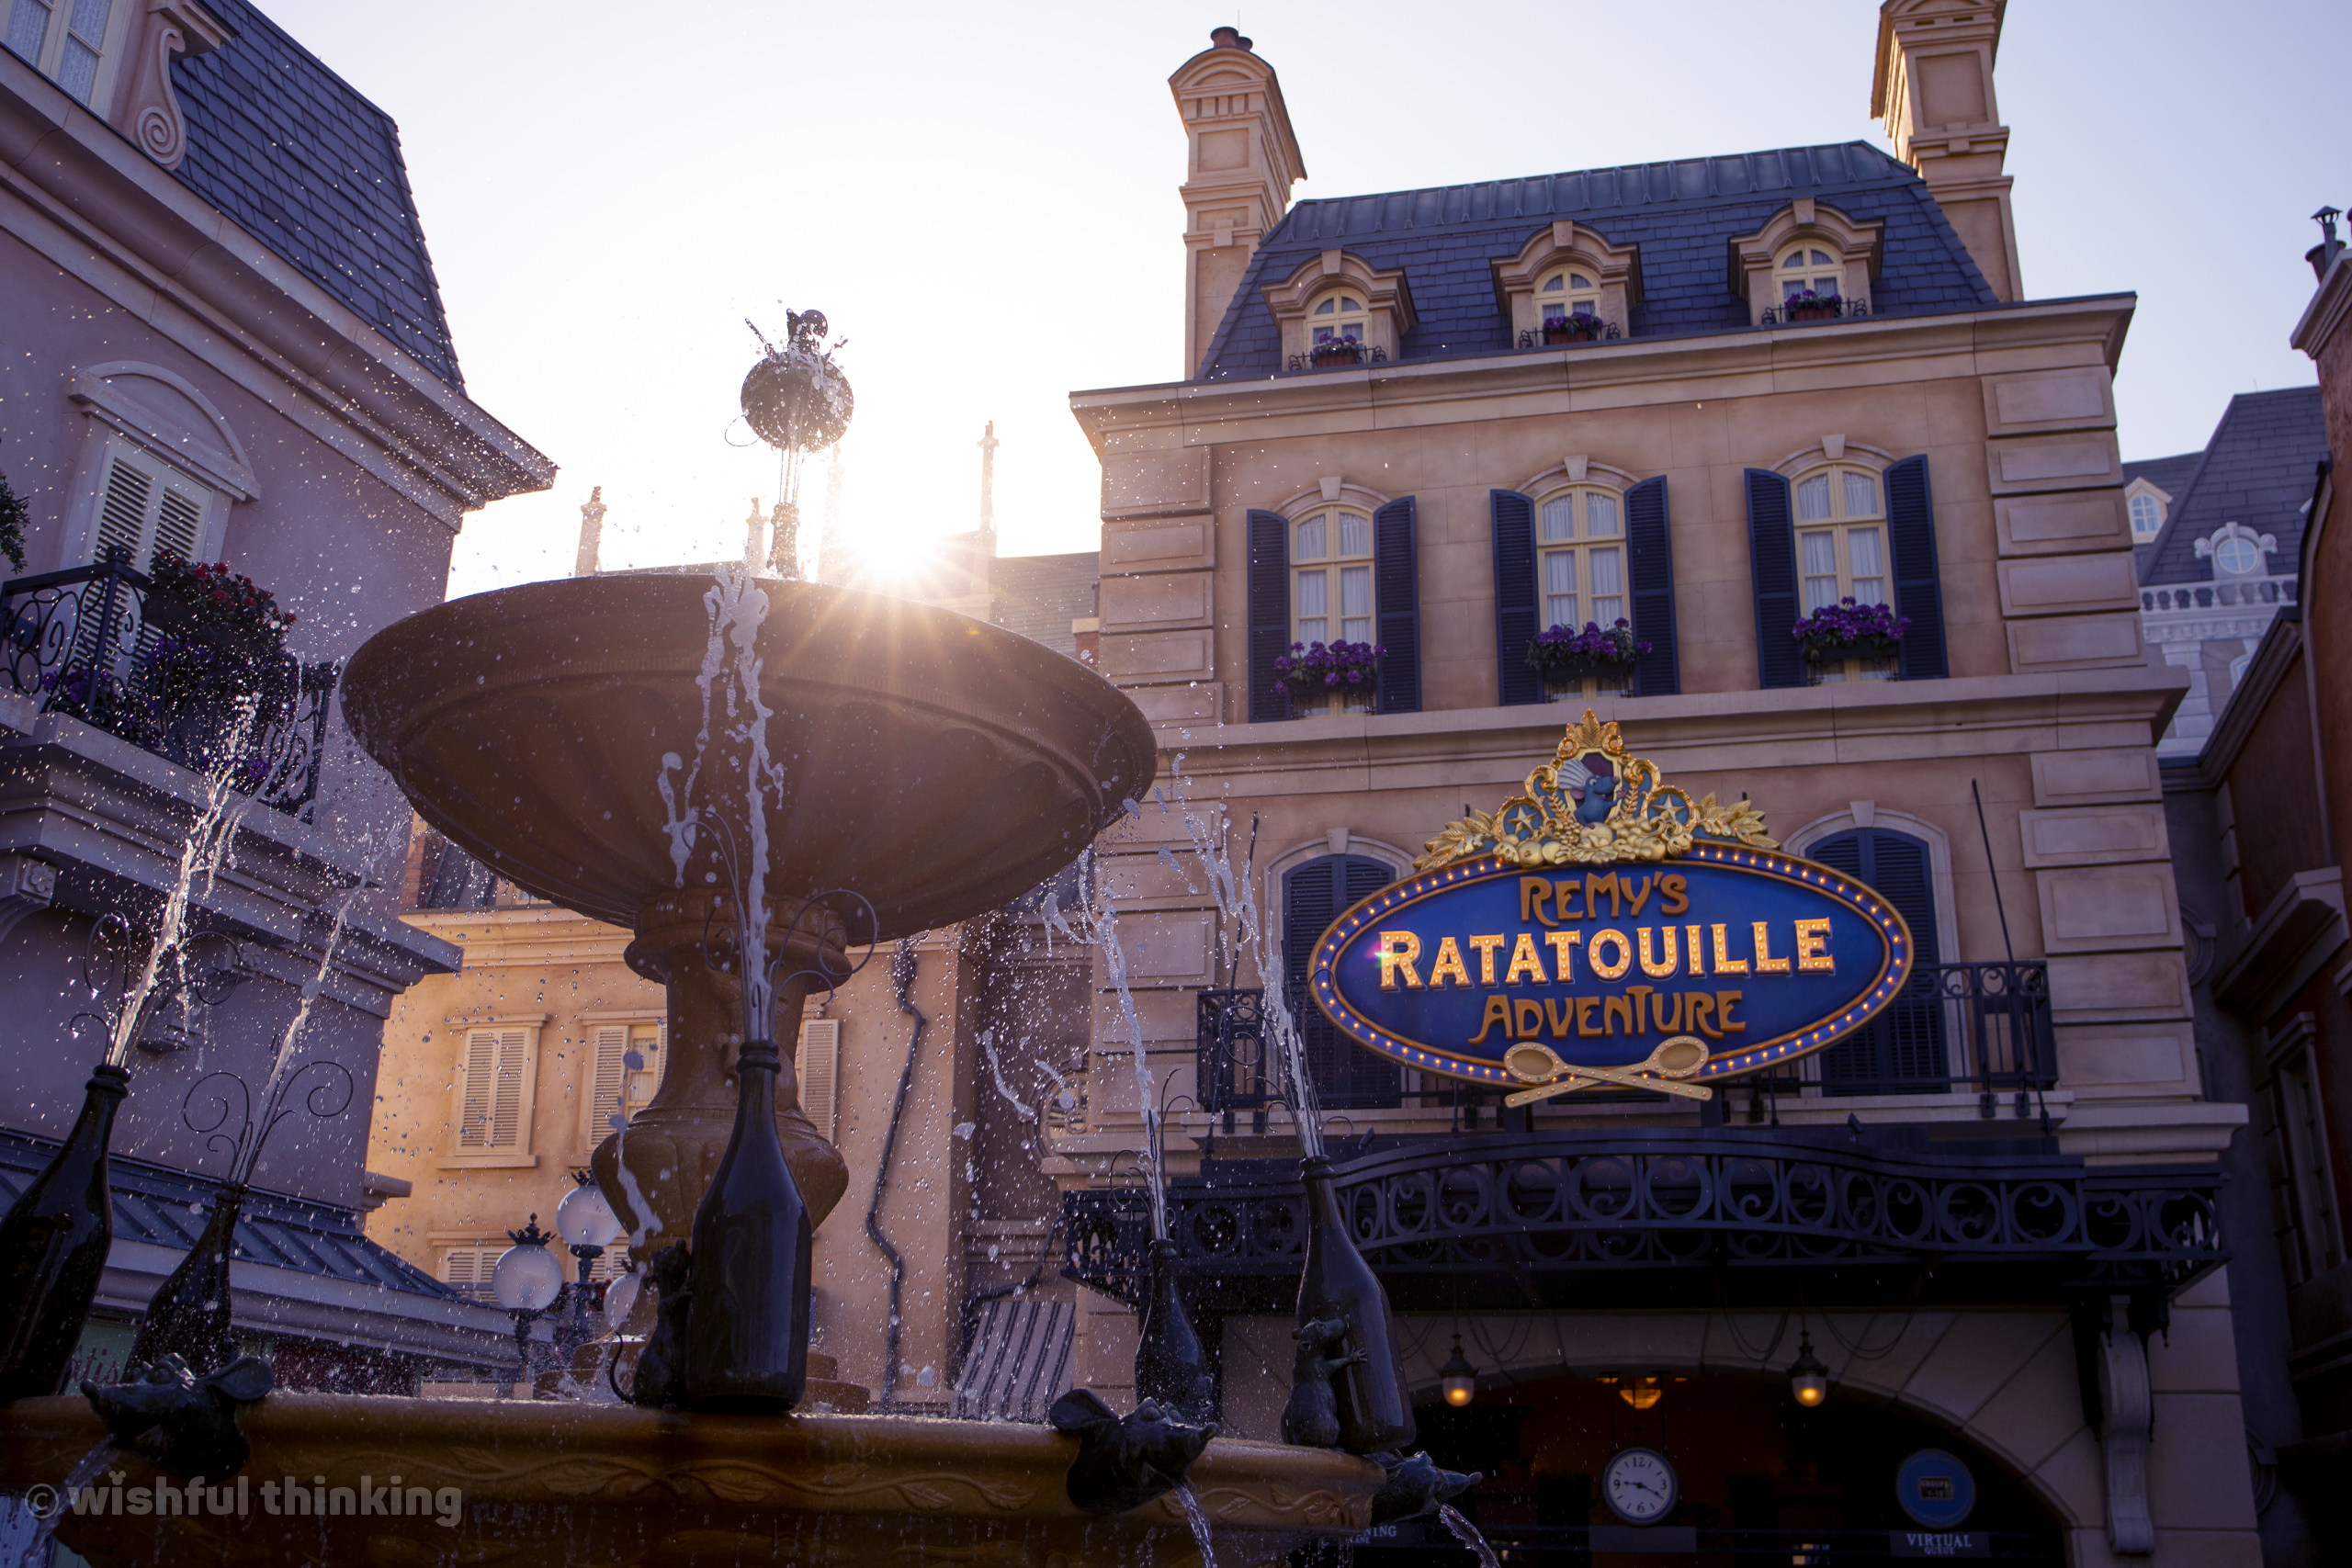 Remy's Ratatouille Adventure glows with morning light in the France pavilion at EPCOT